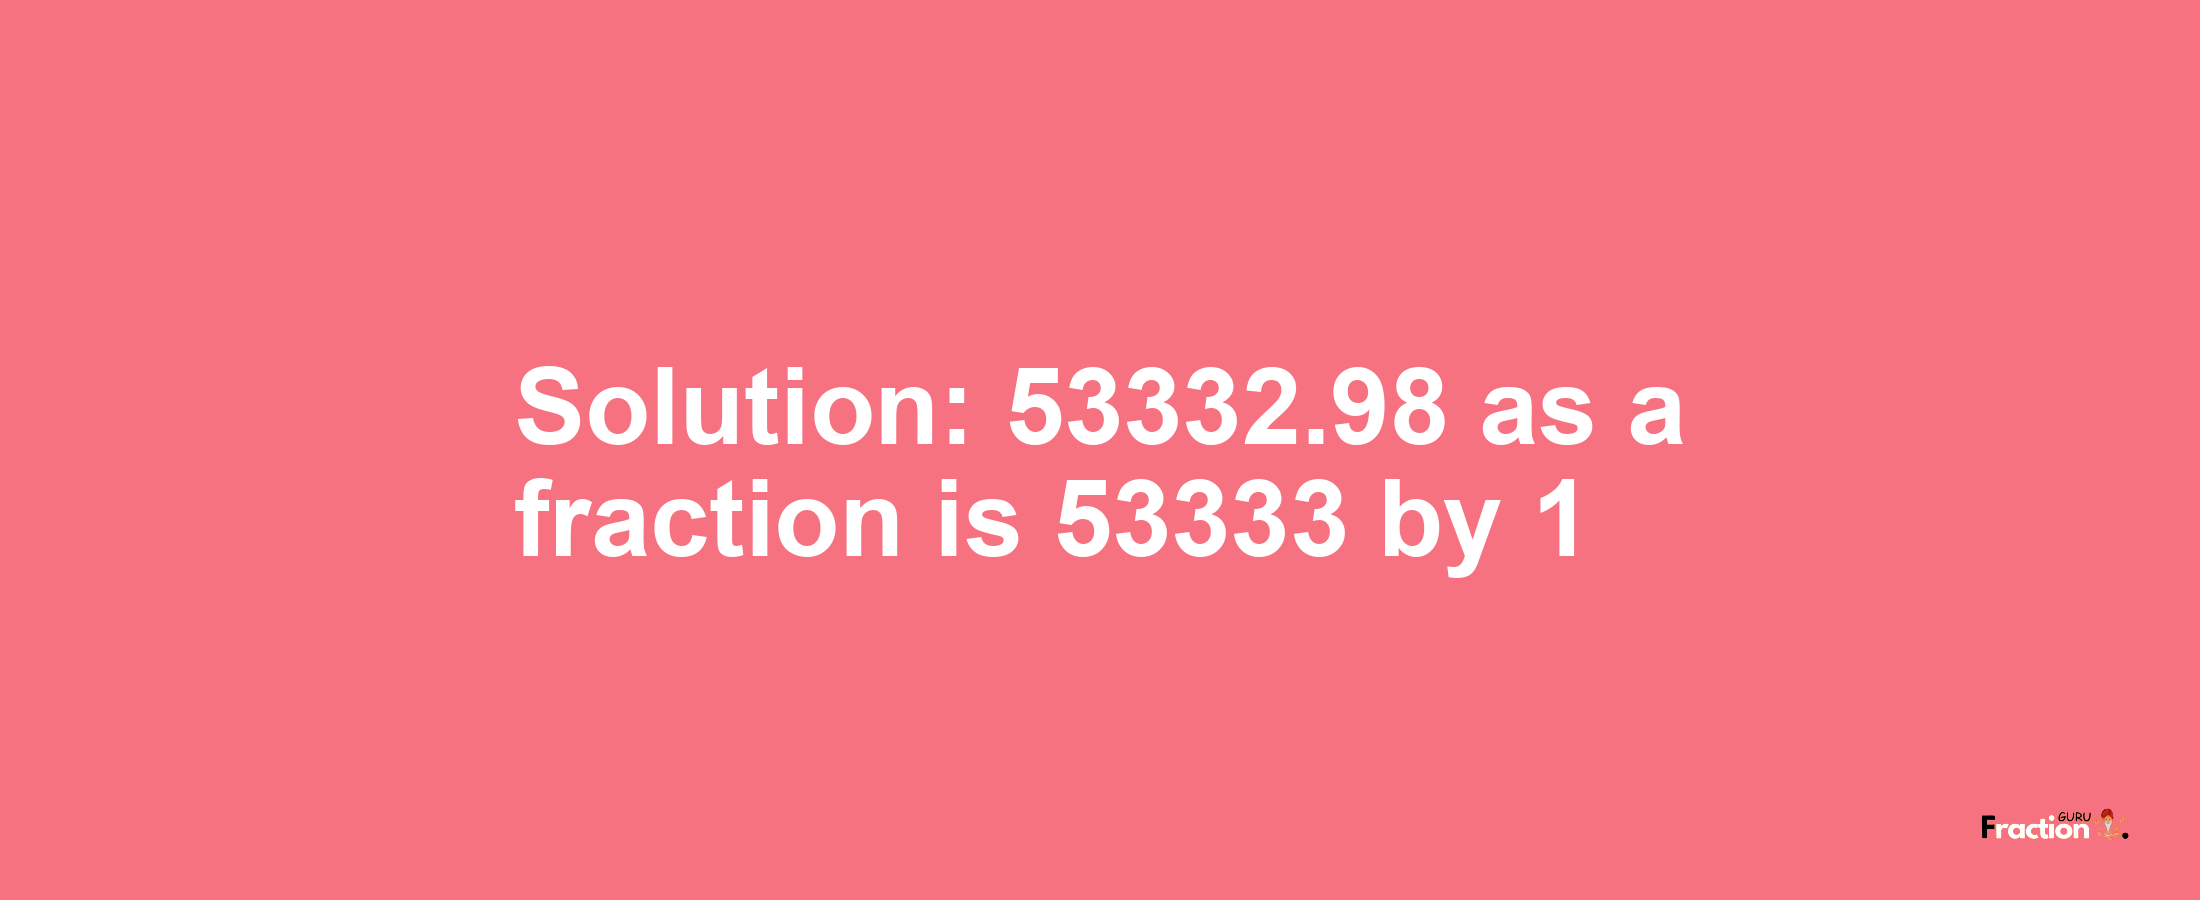 Solution:53332.98 as a fraction is 53333/1